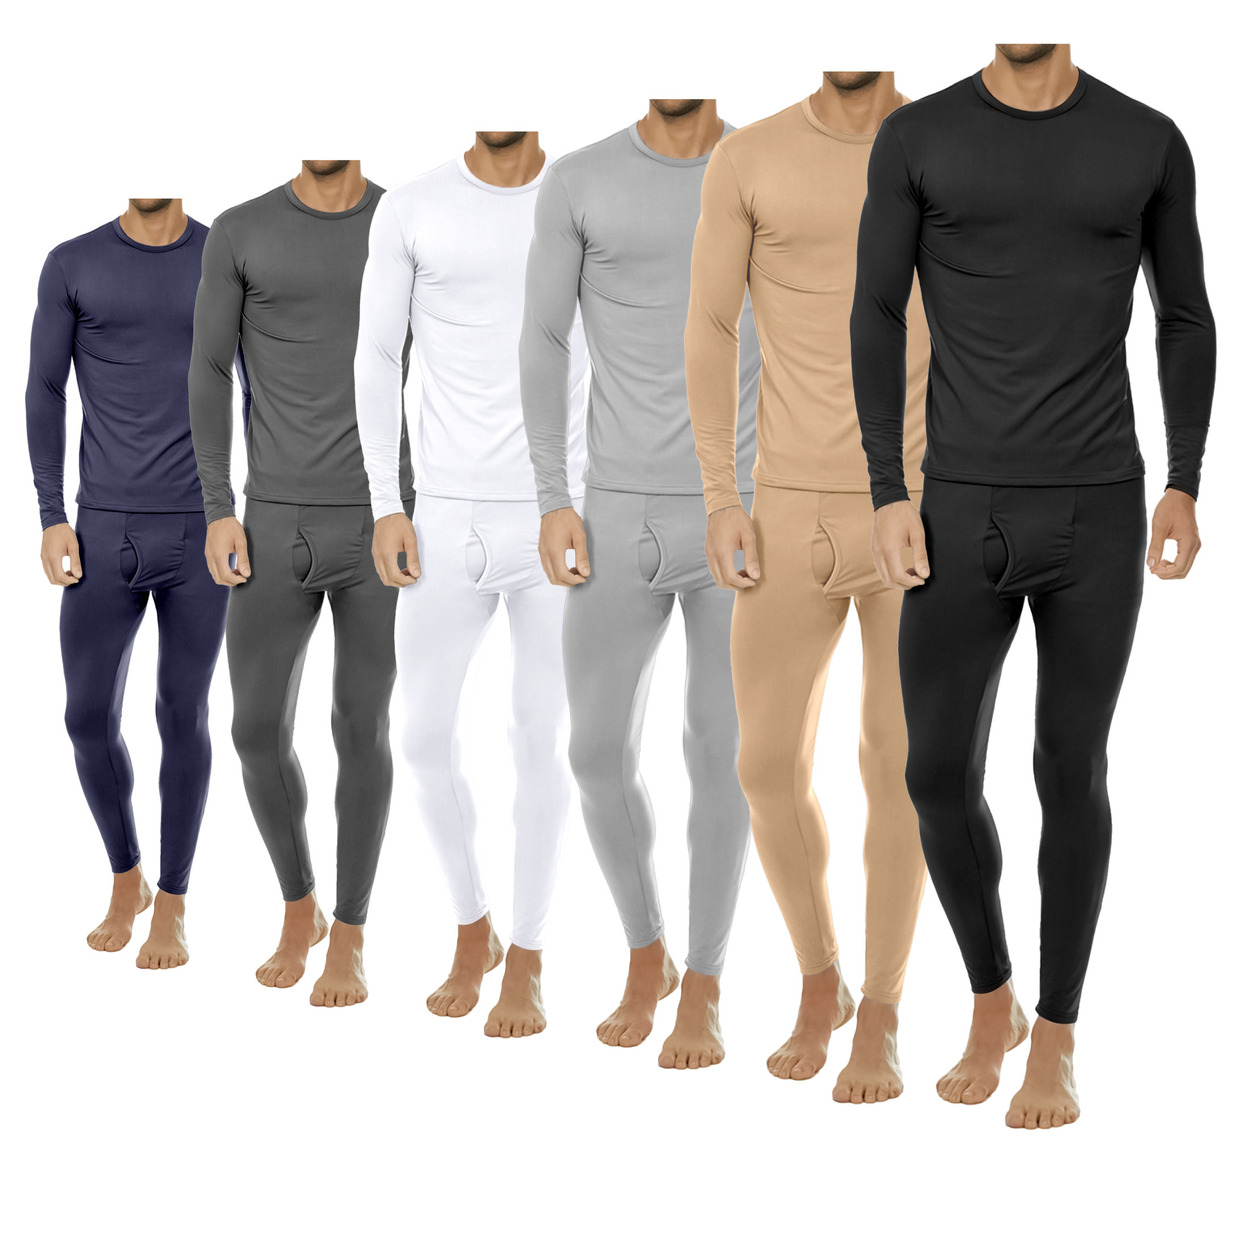 2-Sets: Men's Winter Warm Fleece Lined Thermal Underwear Set For Cold Weather - Grey&navy, X-large